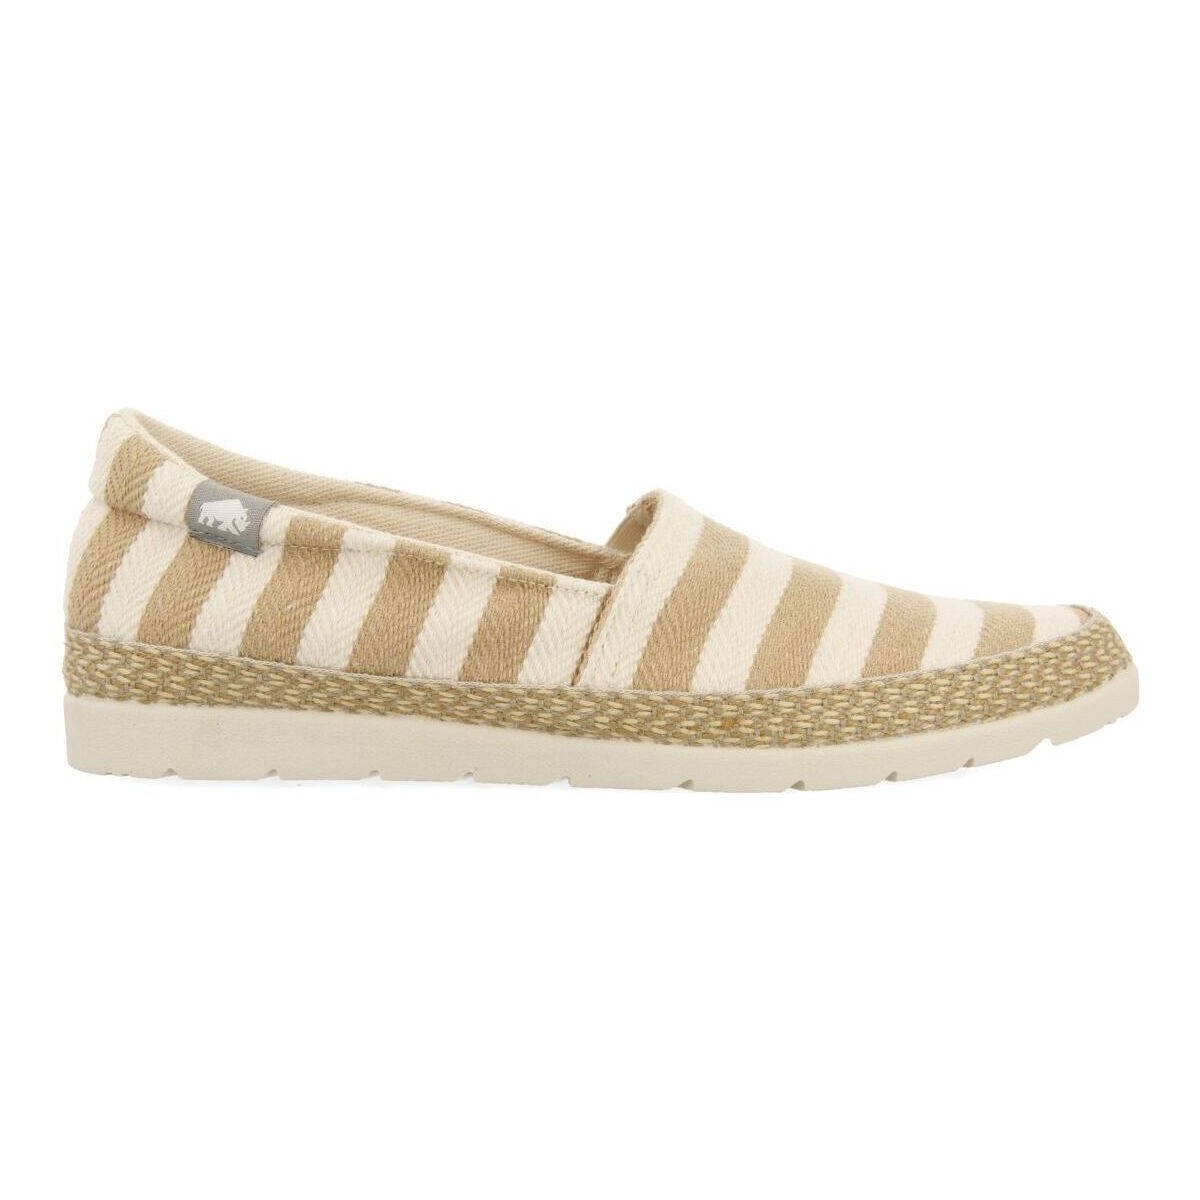 Chaussures Homme Espadrilles Gioseppo STROUD Beige